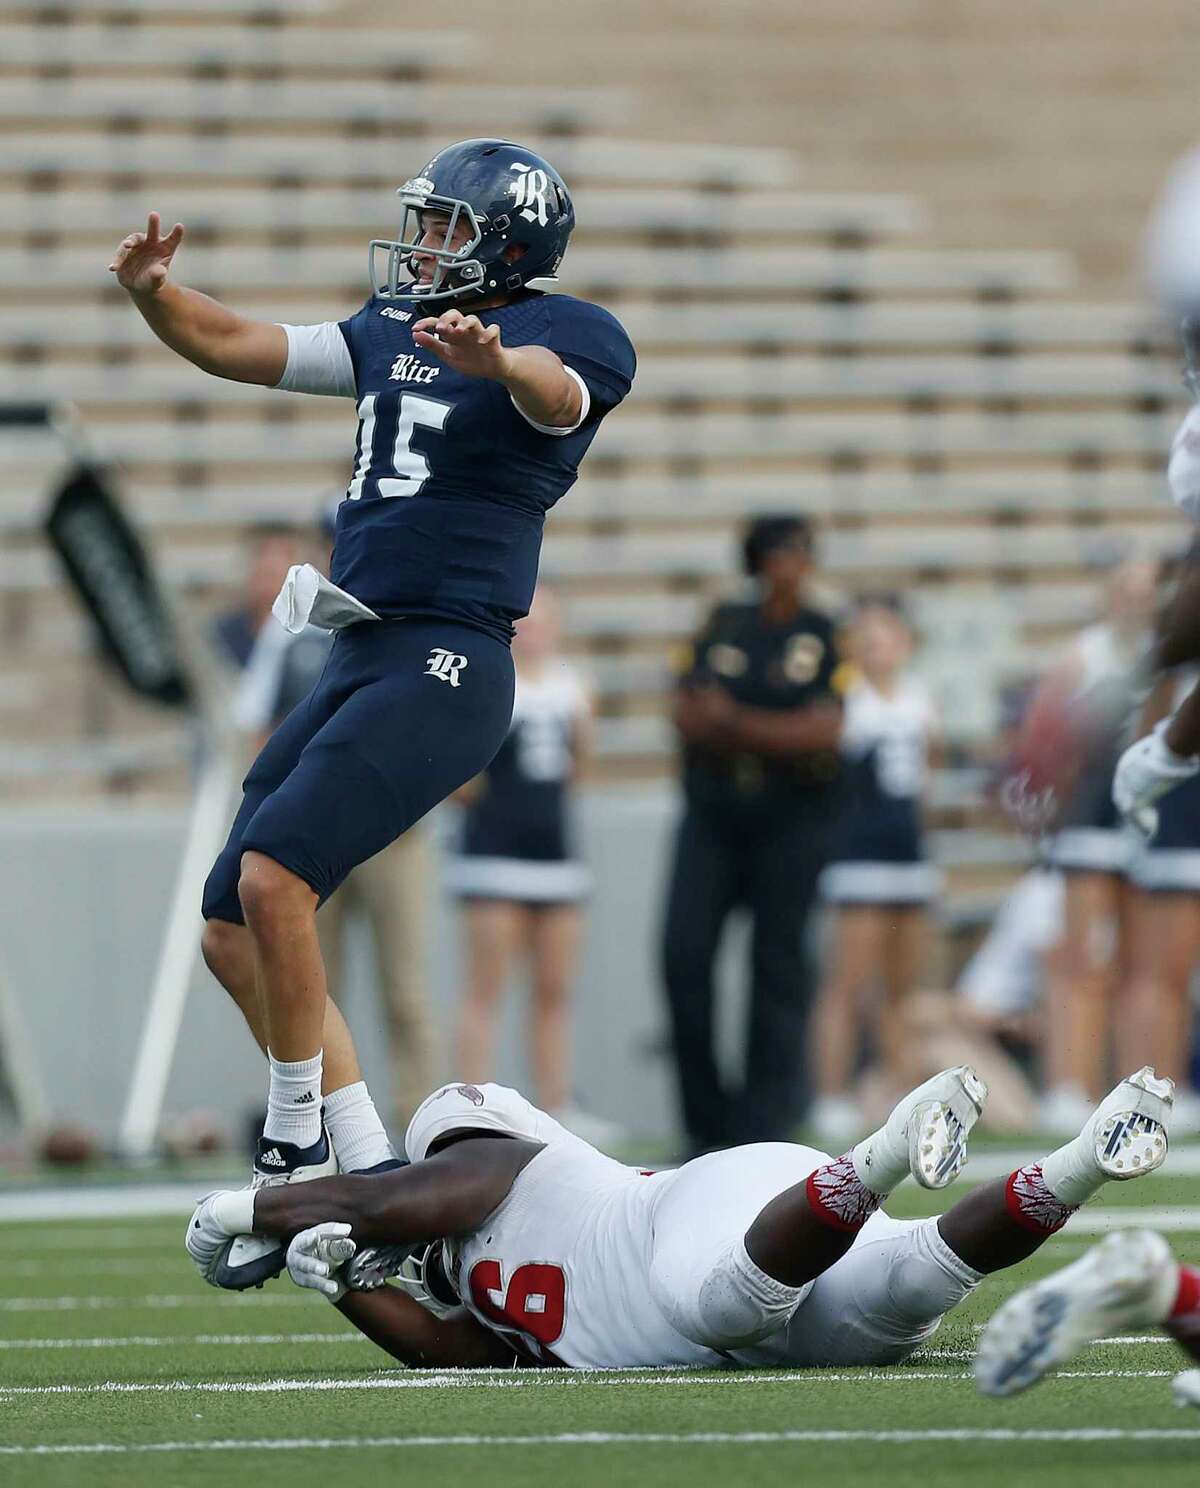 Redshirt sophomores J.T. Granato, above, and Jackson Tyner are the most experienced of the quarterbacks who will compete for the starting job at Rice.